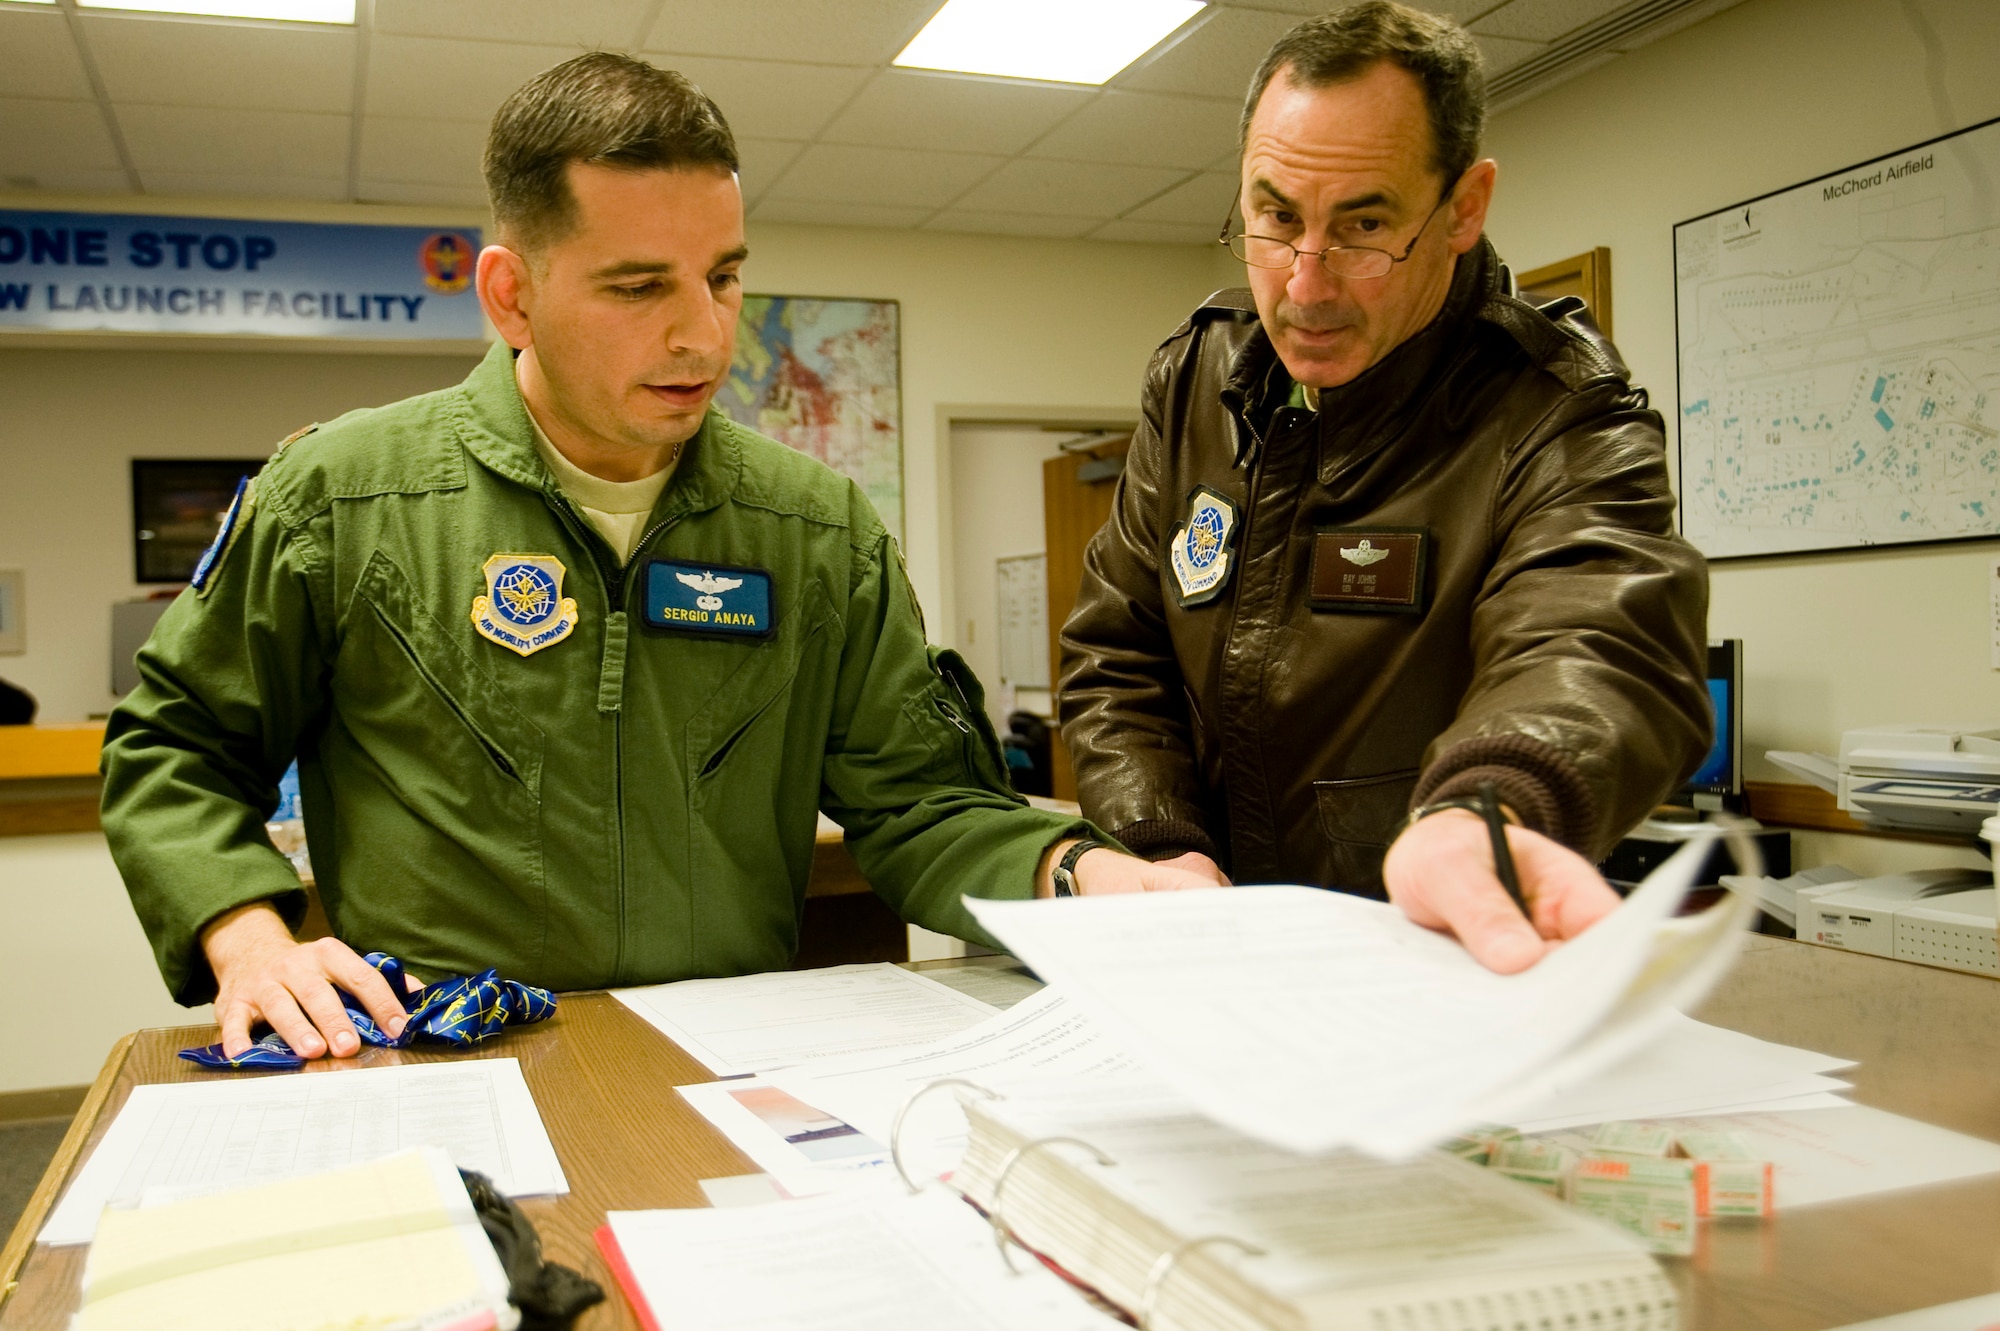 Gen. Raymond E. Johns, Jr., Air Mobility Command commander and Maj. Sergio Anaya, 7th Airlift Squadron, attend a pre-flight mission briefing at McChord's One Stop aircrew launching facility here Monday. (U.S. Air Force Photo/Abner Guzman)